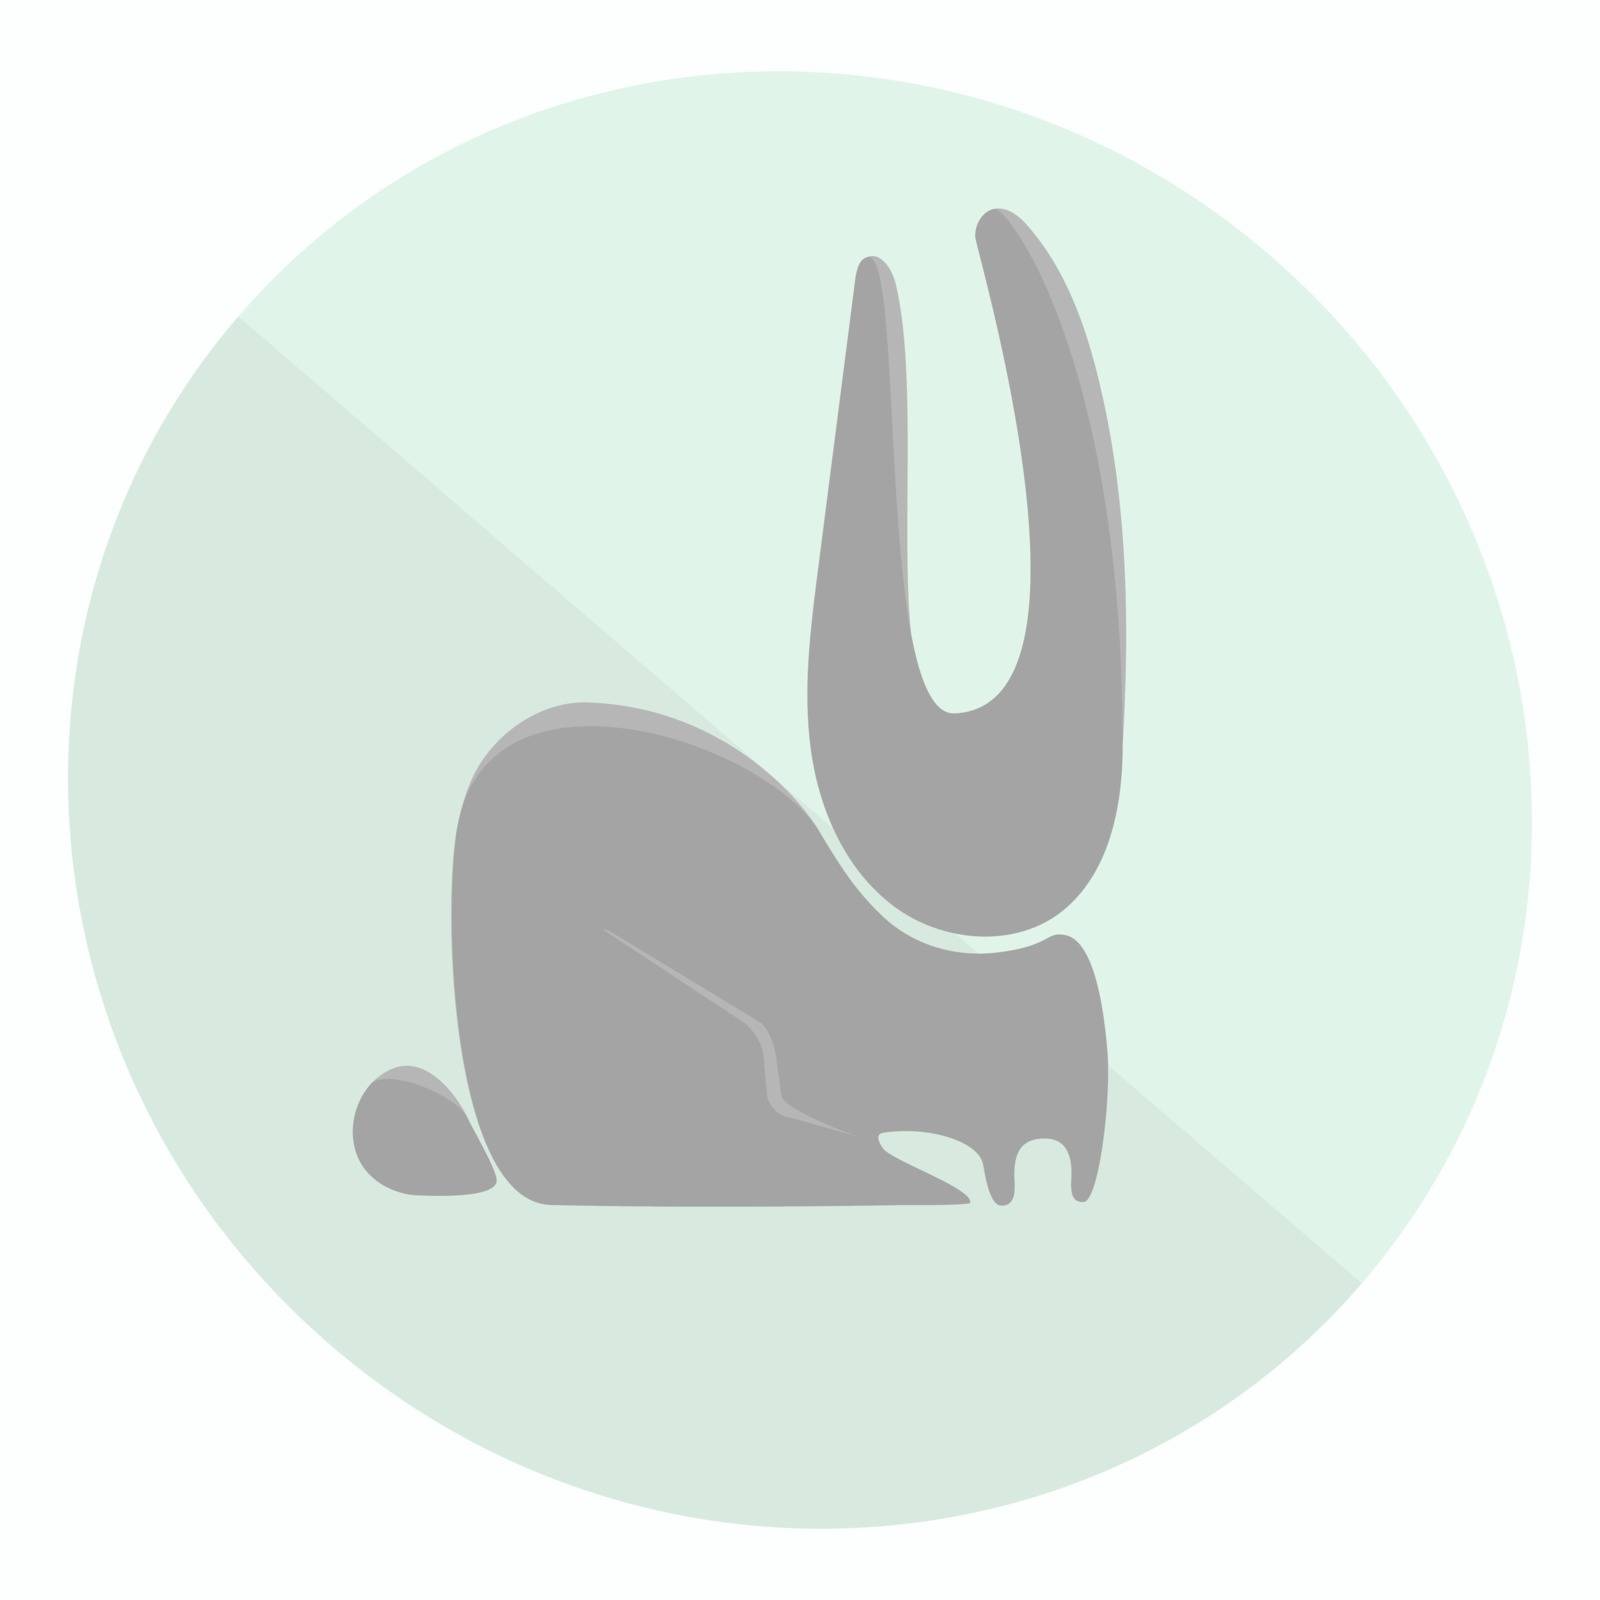 Excellent two-colored flat rabbit icon for your design